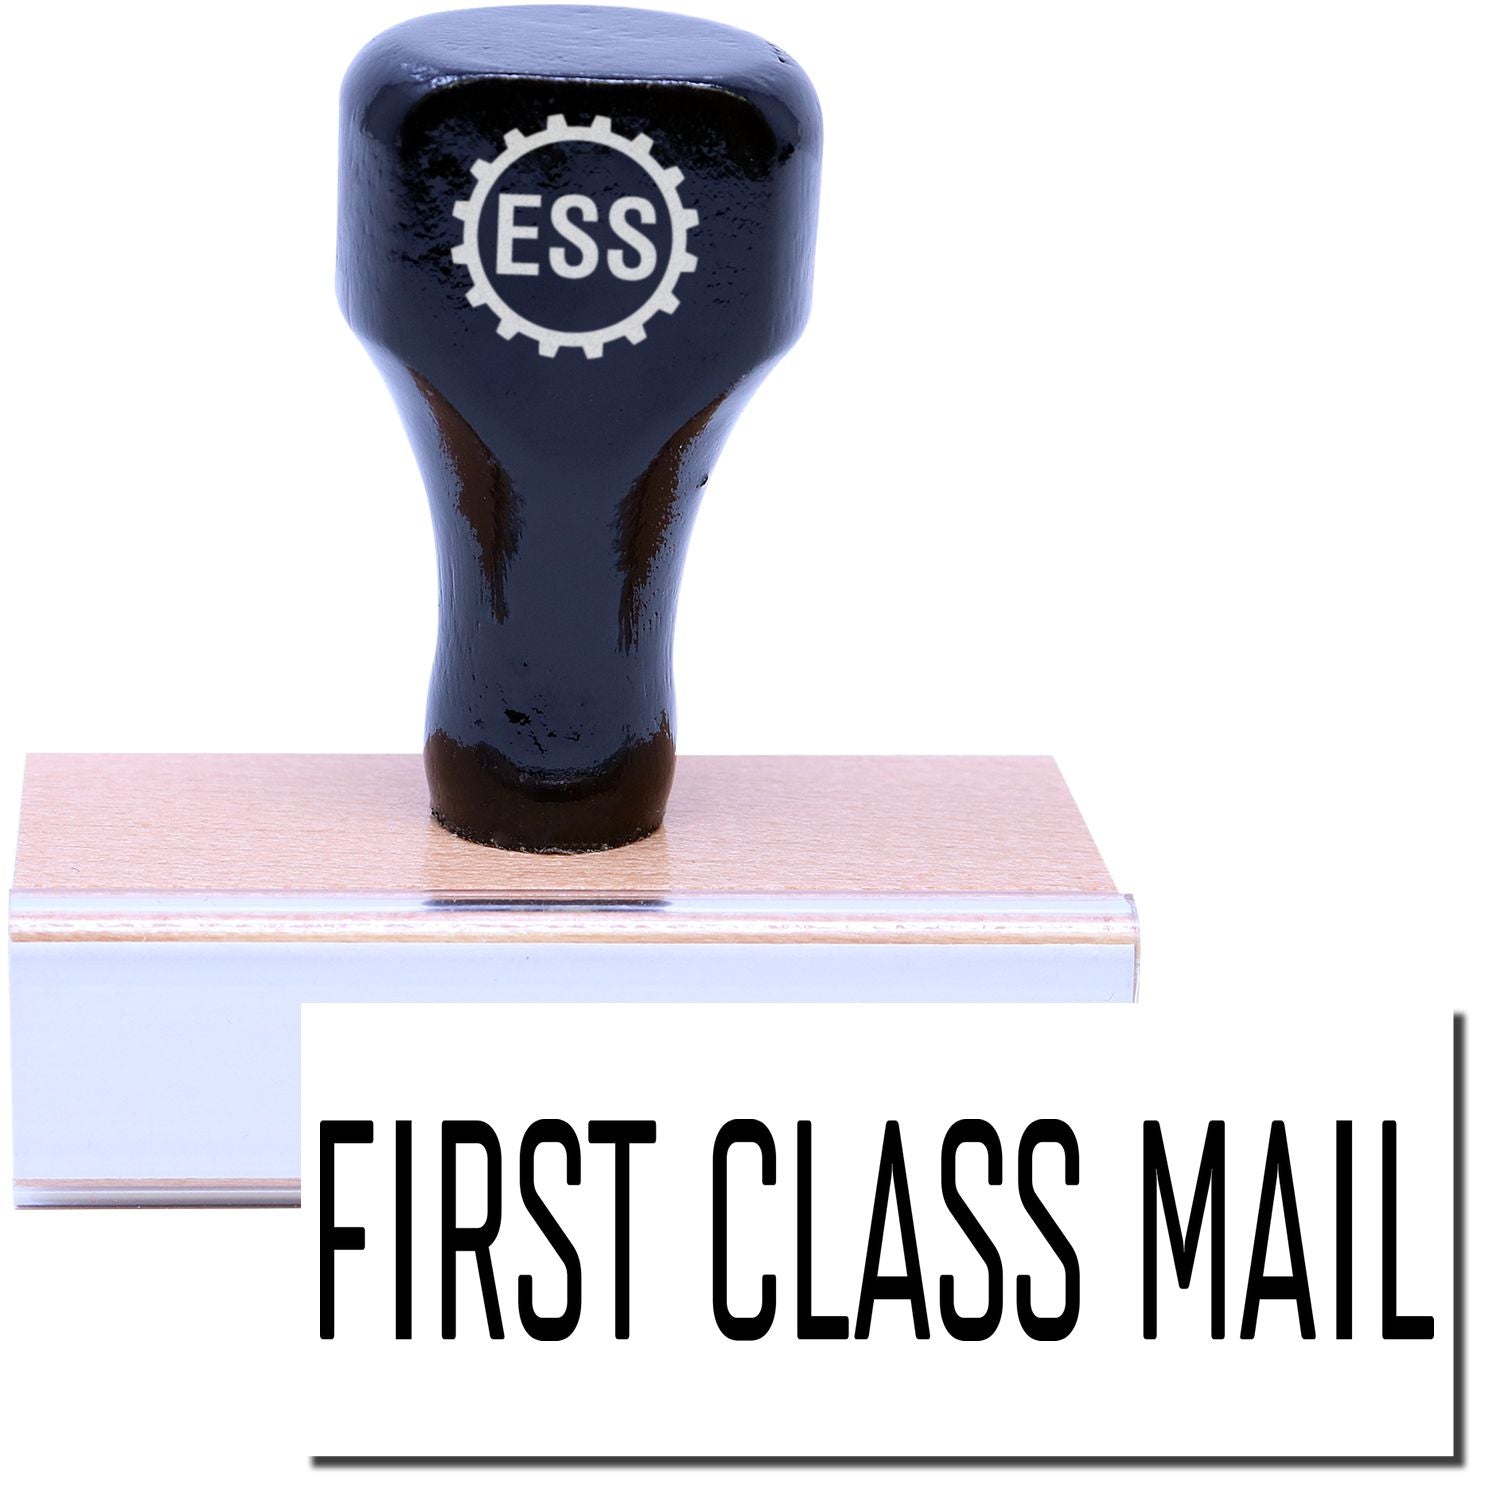 A stock office rubber stamp with a stamped image showing how the text "FIRST CLASS MAIL" in a narrow font is displayed after stamping.